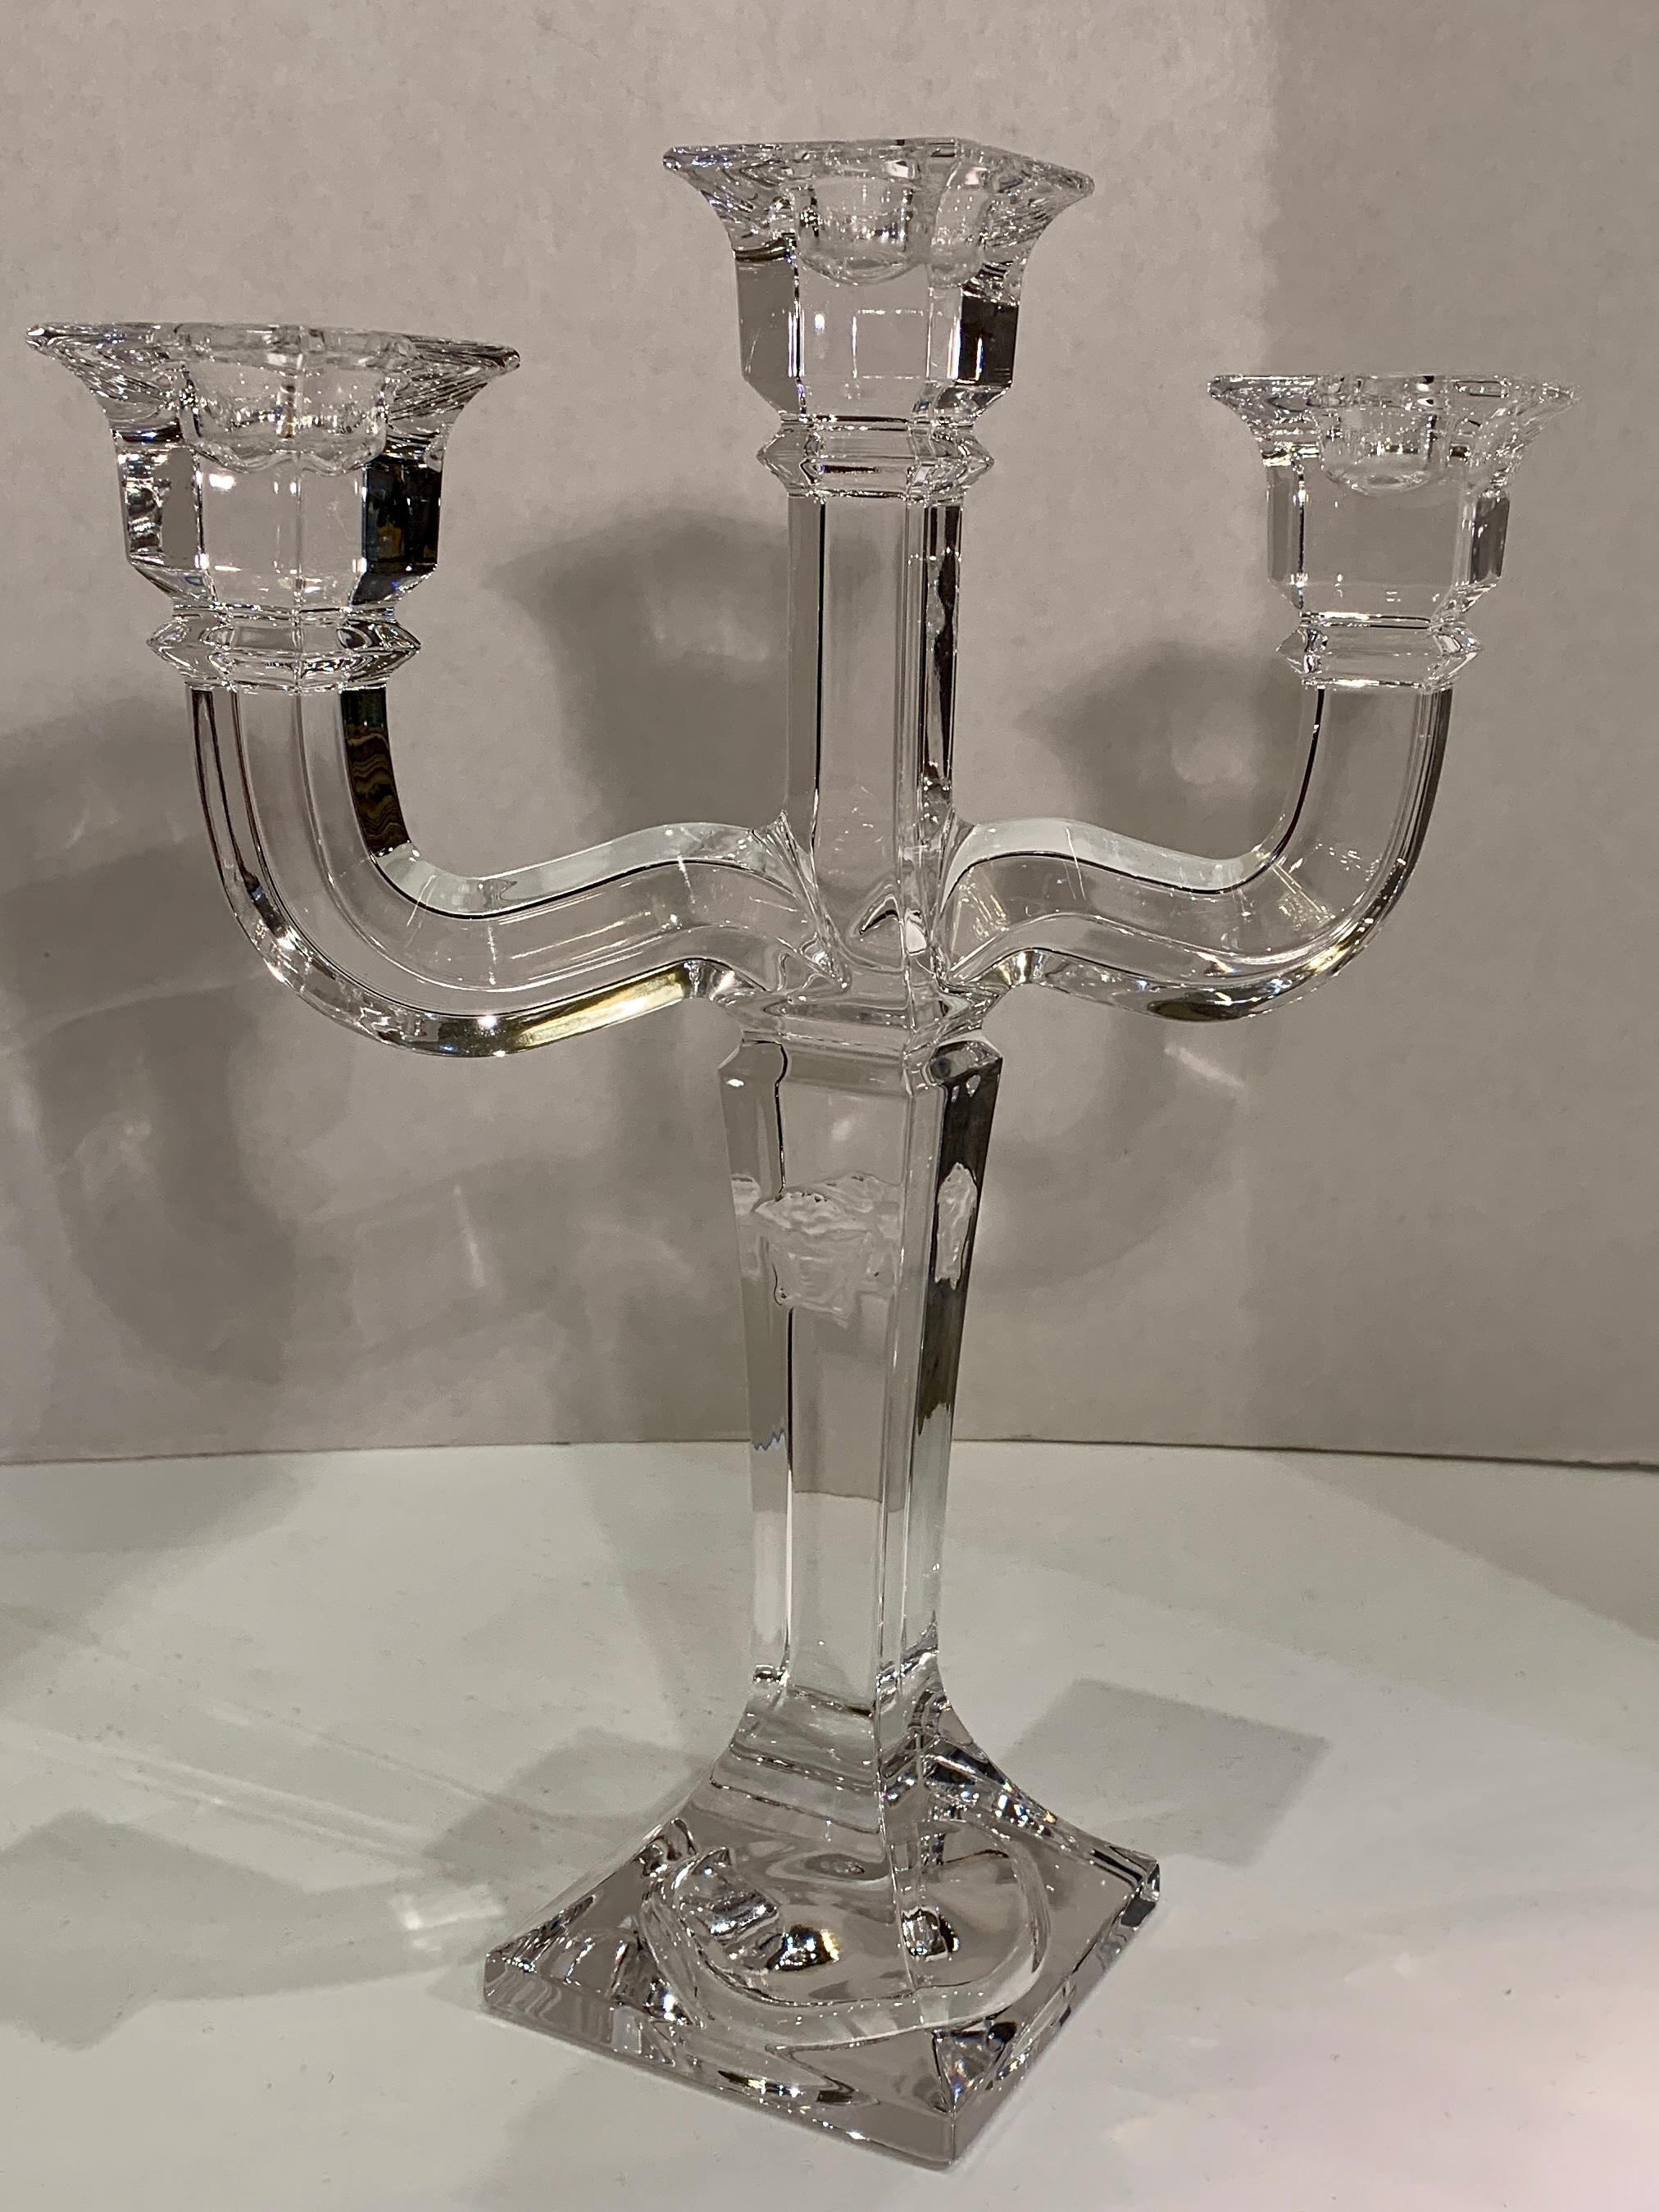 Gray Versace Crystal Candelabra by Rosenthal 3 Branch Candle Holder 